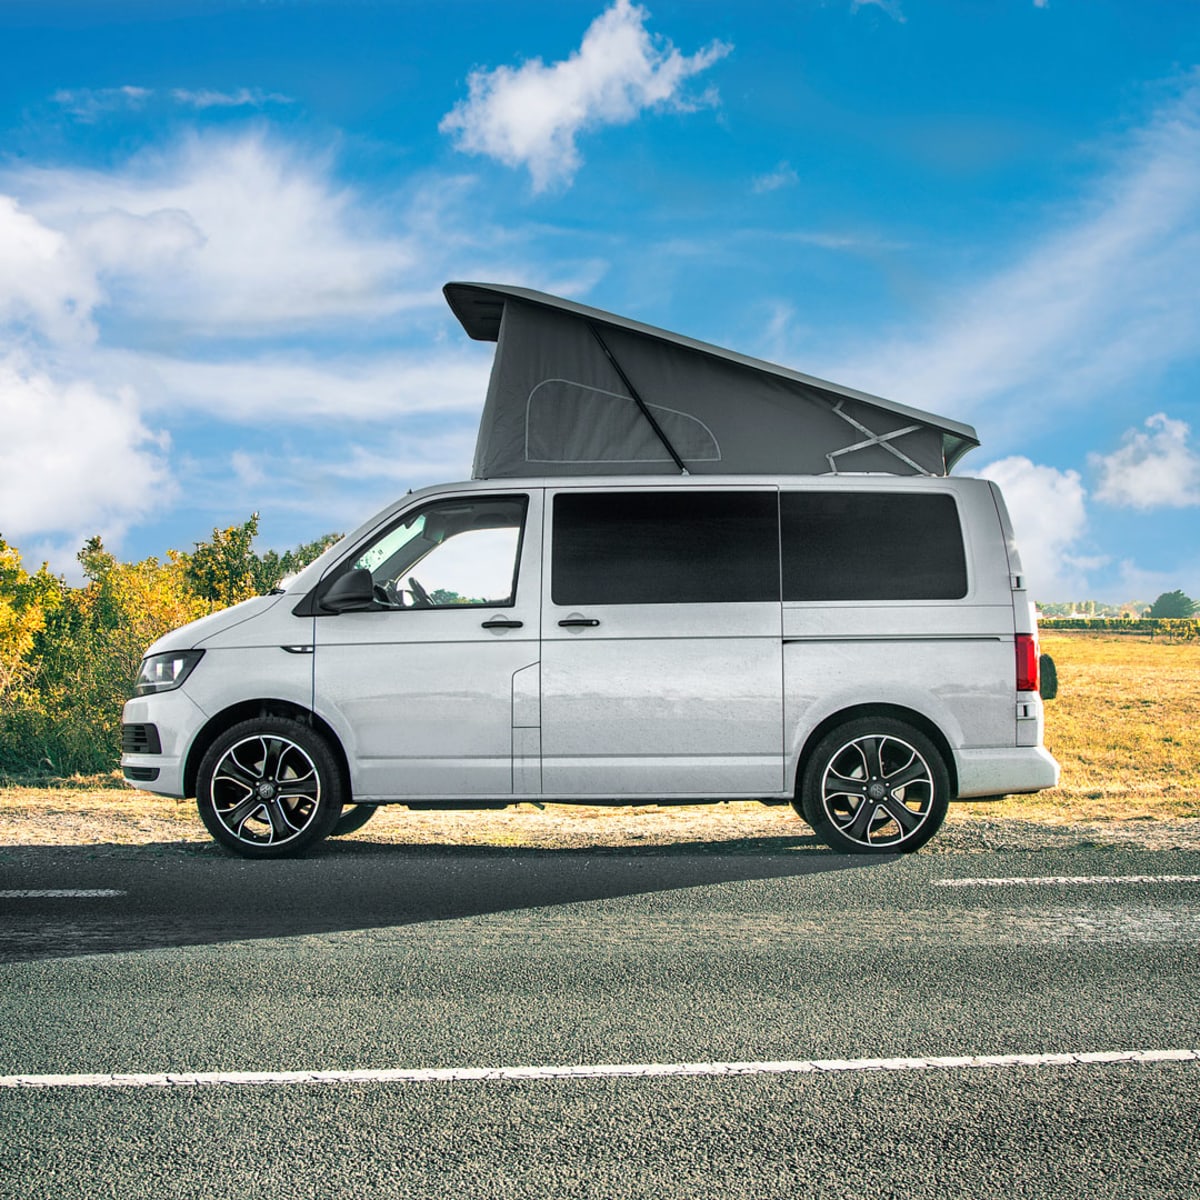 VW T6 Campervan - brand new conversion from £97.00 p.d. - Goboony